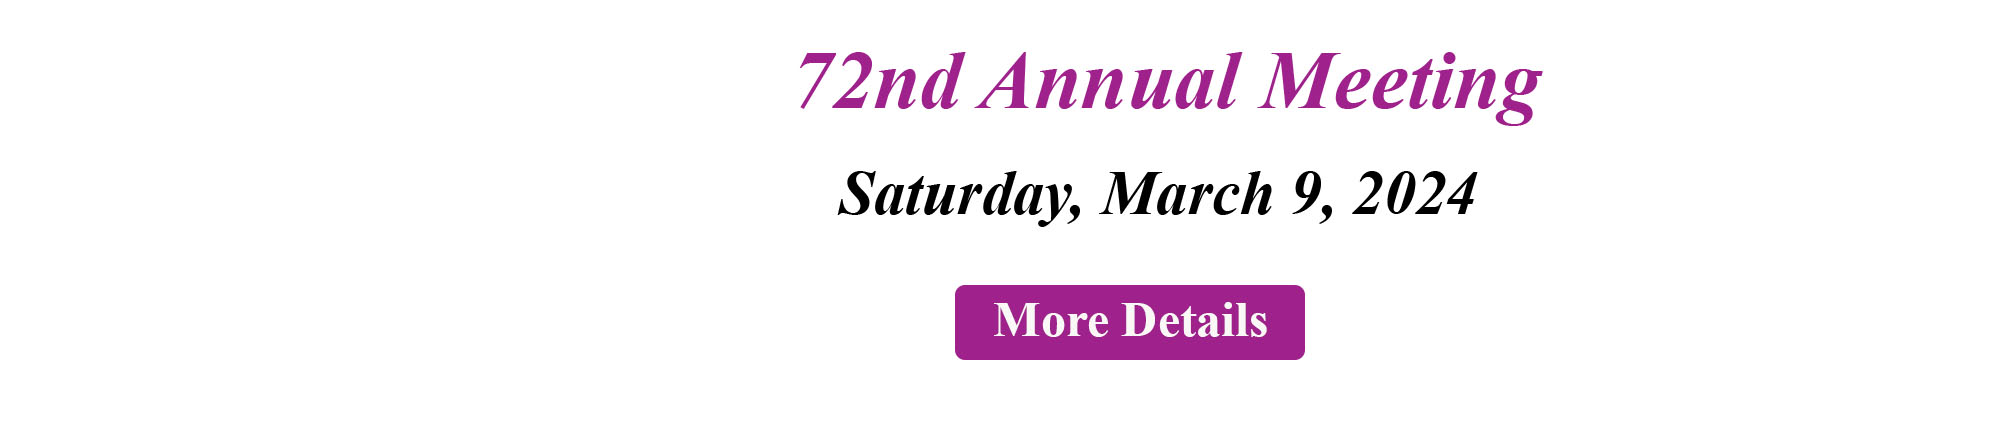 seventy second annual meeting Saturday march ninth. click for more details